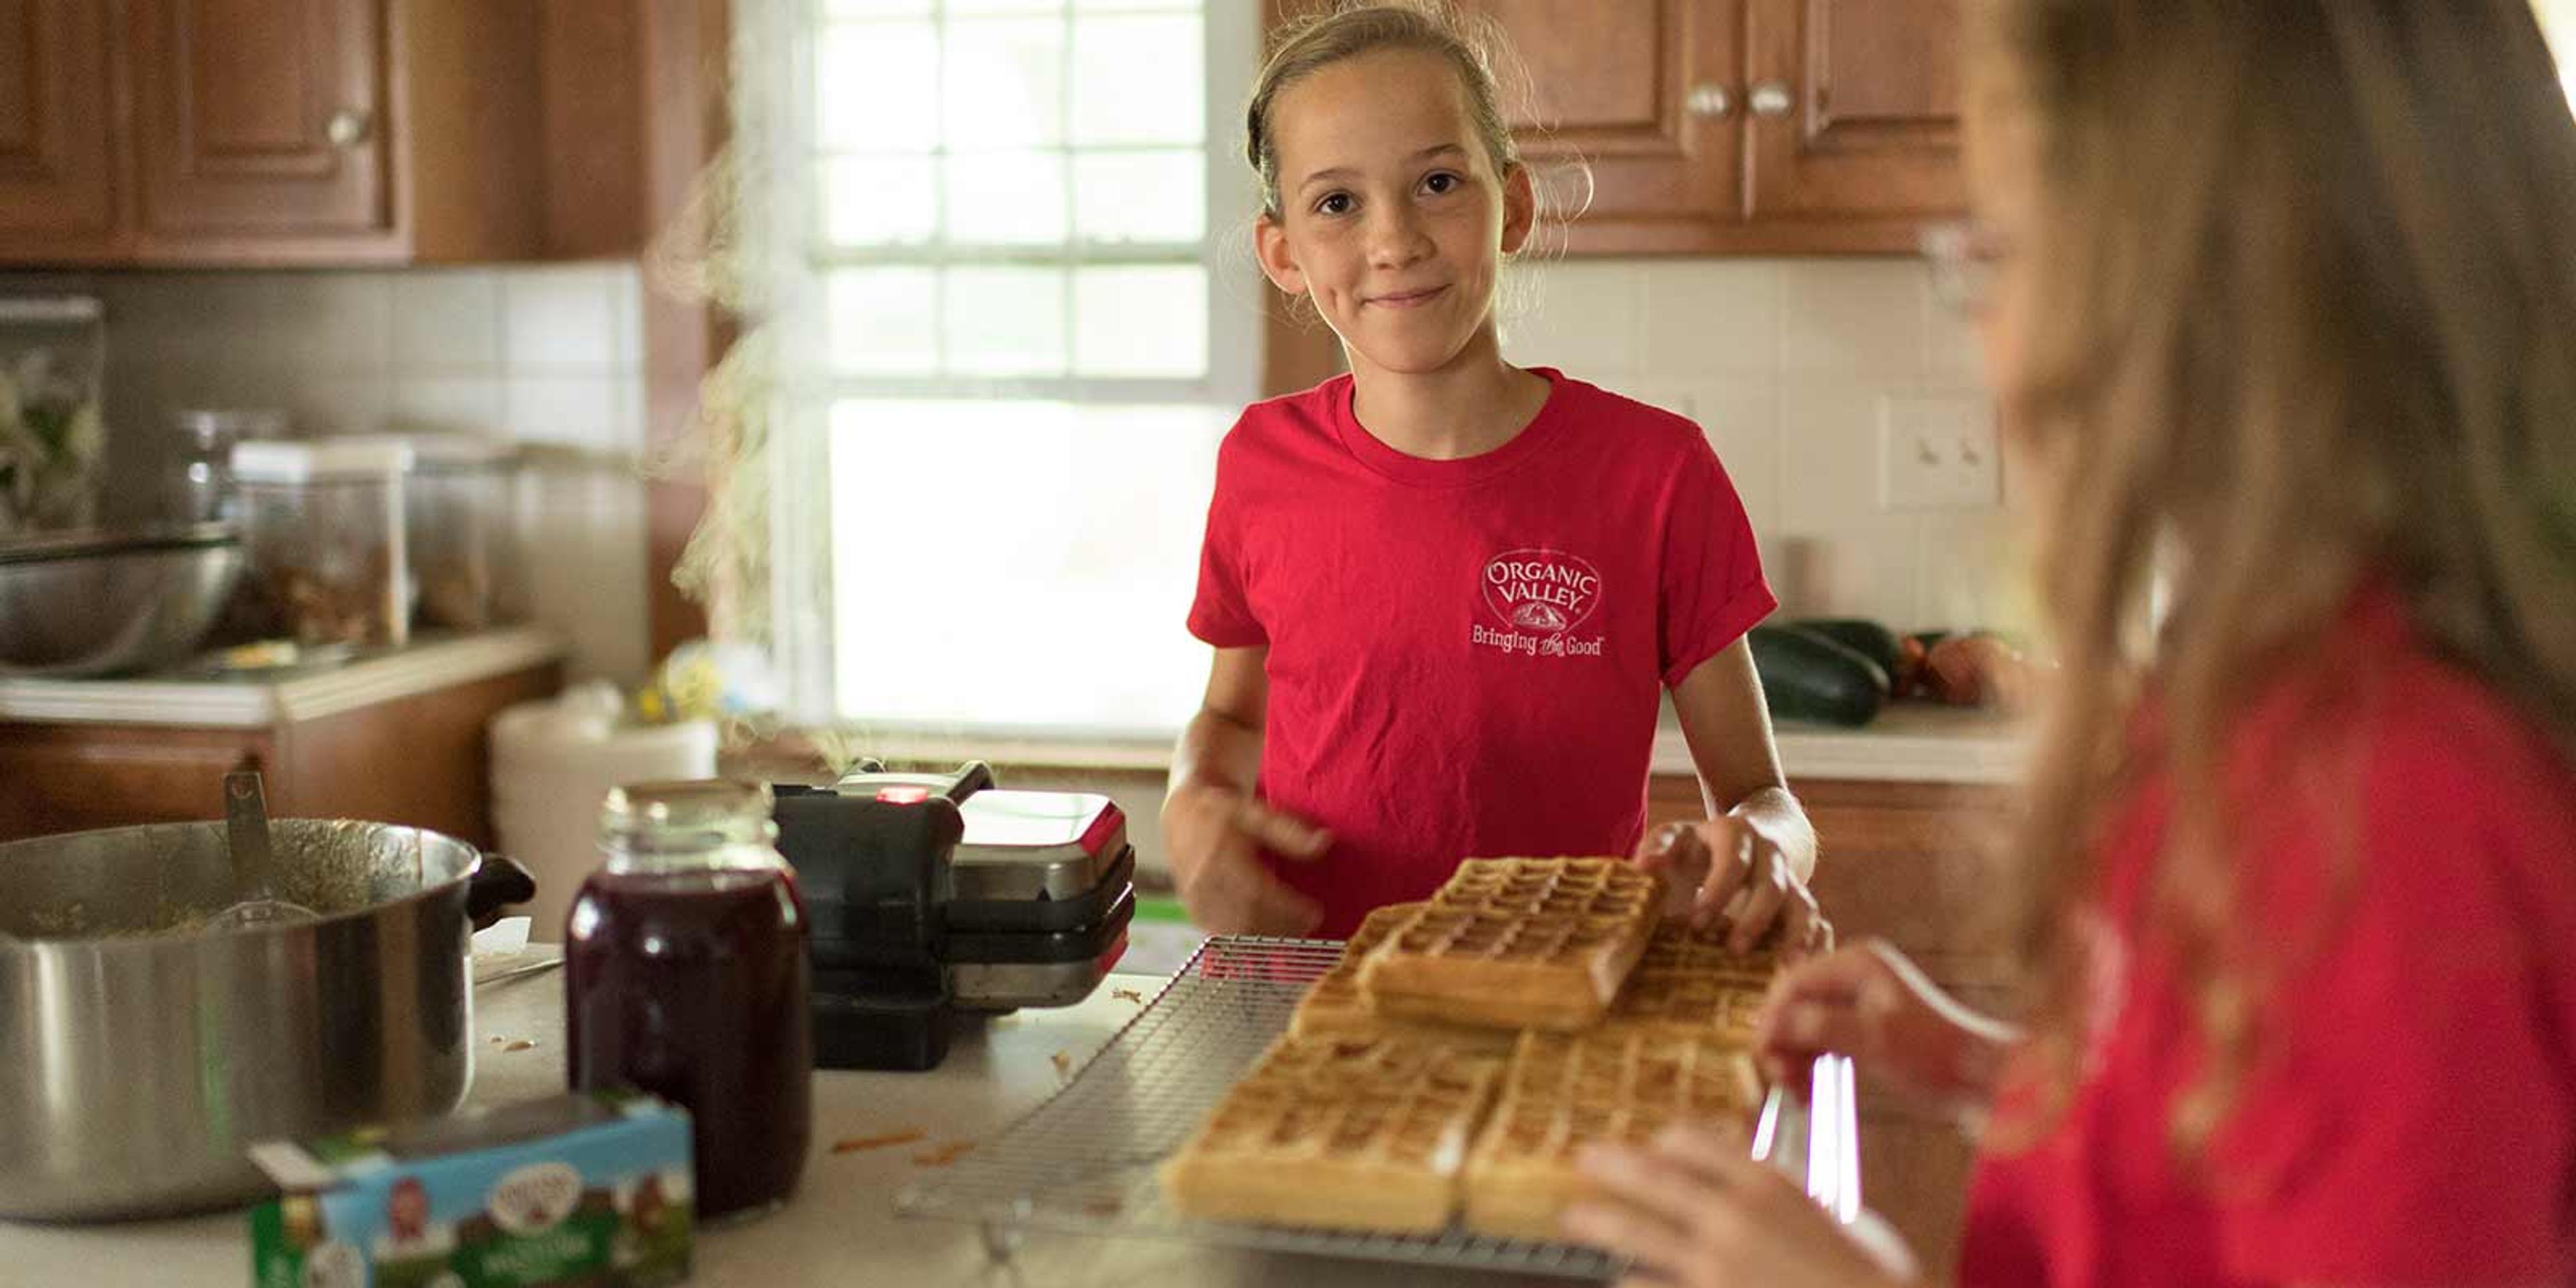 A girl wearing a red shirt smiles at the camera while standing in front of a pile of freshly made waffles in her family’s kitchen